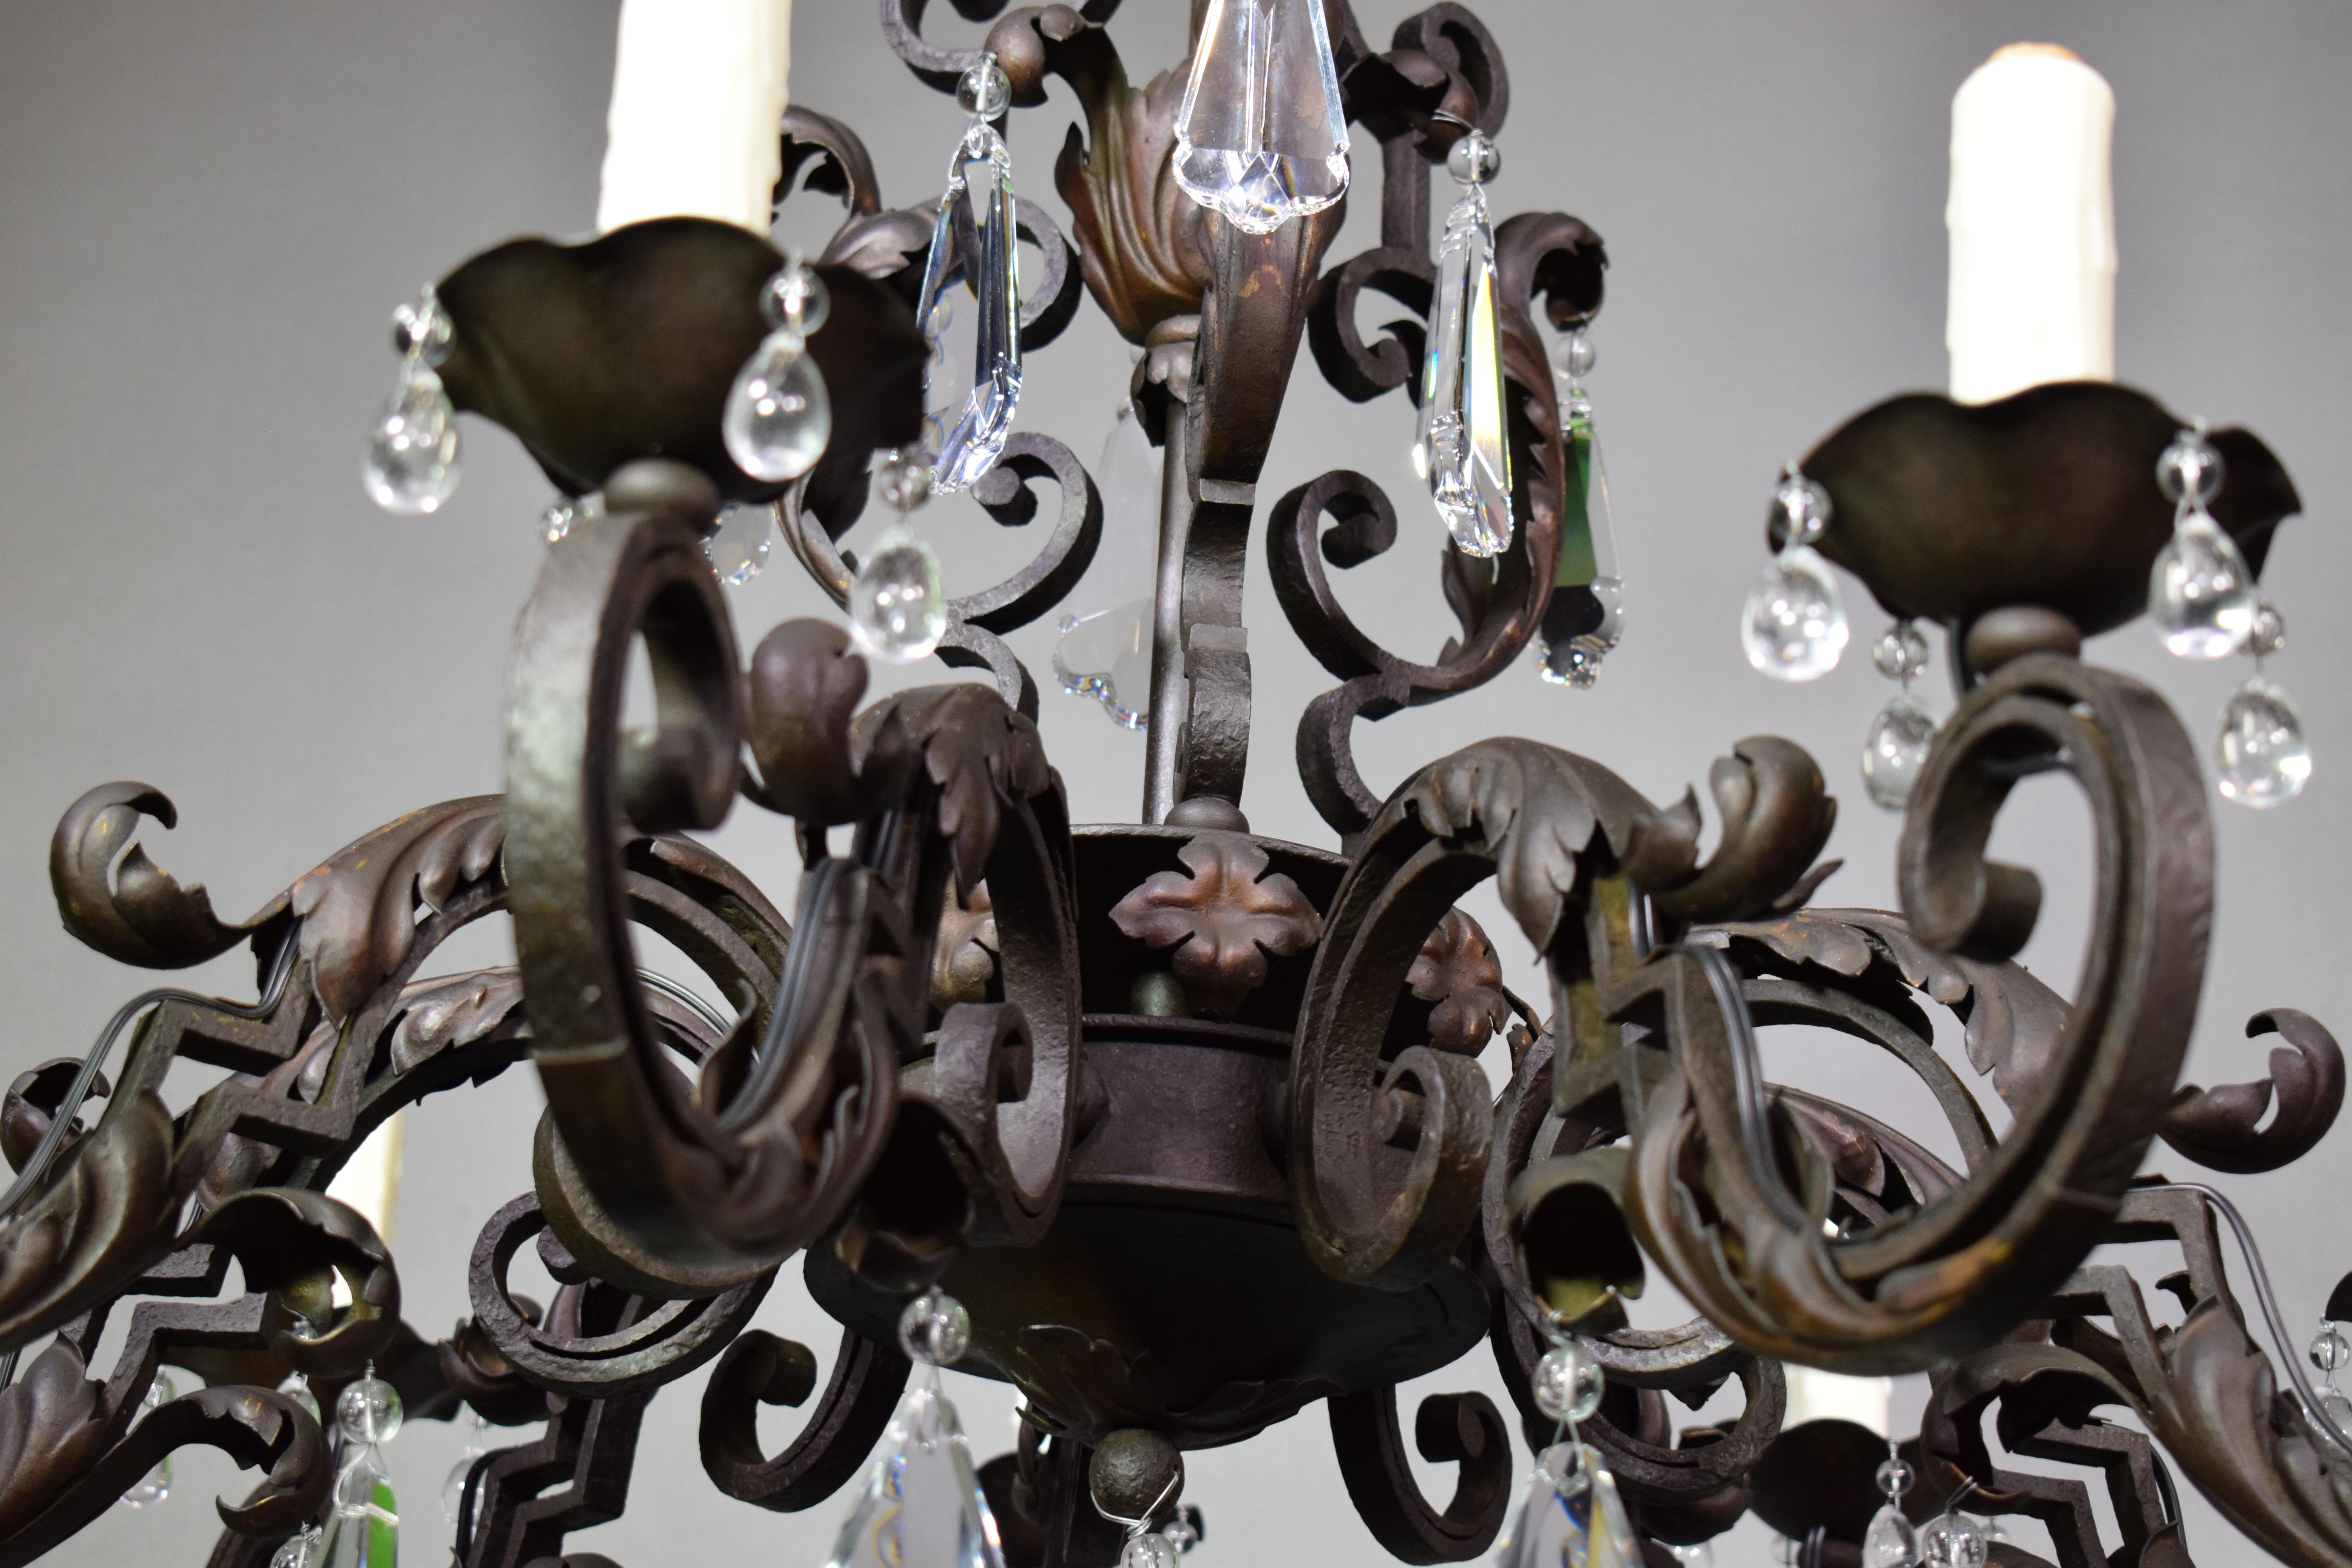 A very fine iron and crystal chandelier with crystal pendalogues. Exquisite hand-hammered work,
France, circa 1900.  9 lights.
Dimensions:  29.5